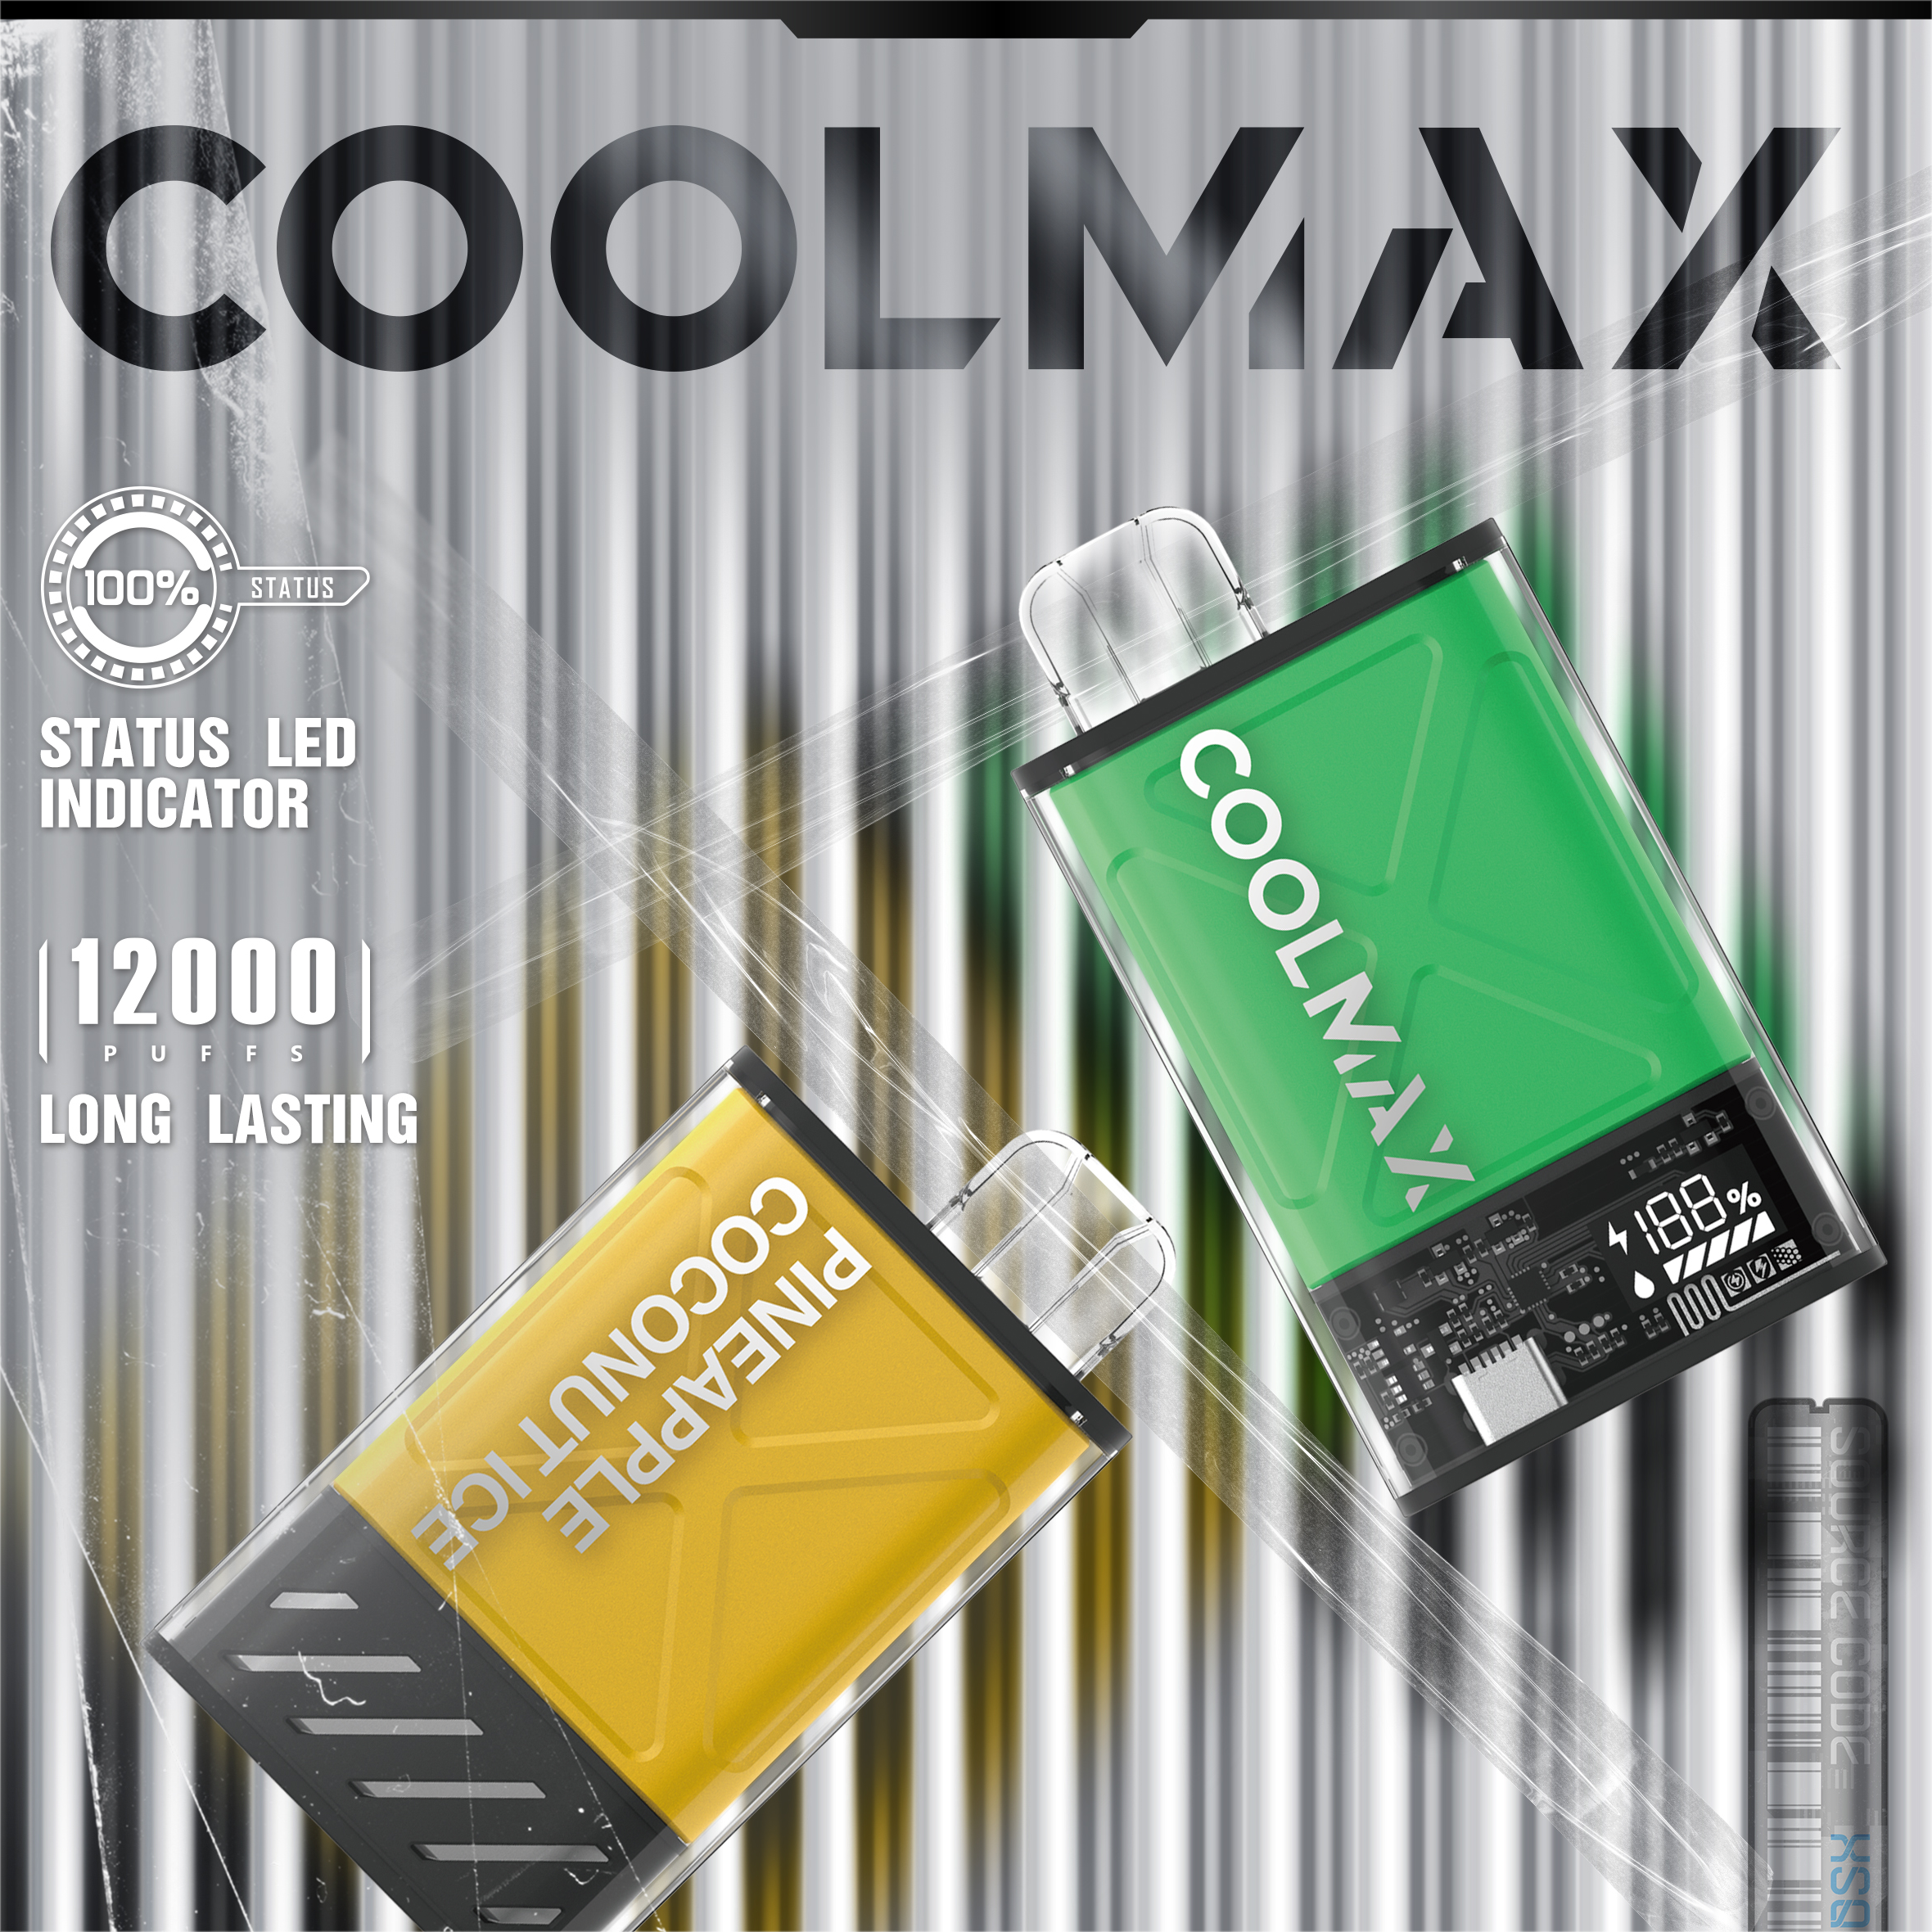 CoolMax Ultra 12K - Extra Large Puffs Rechargeable Disposable